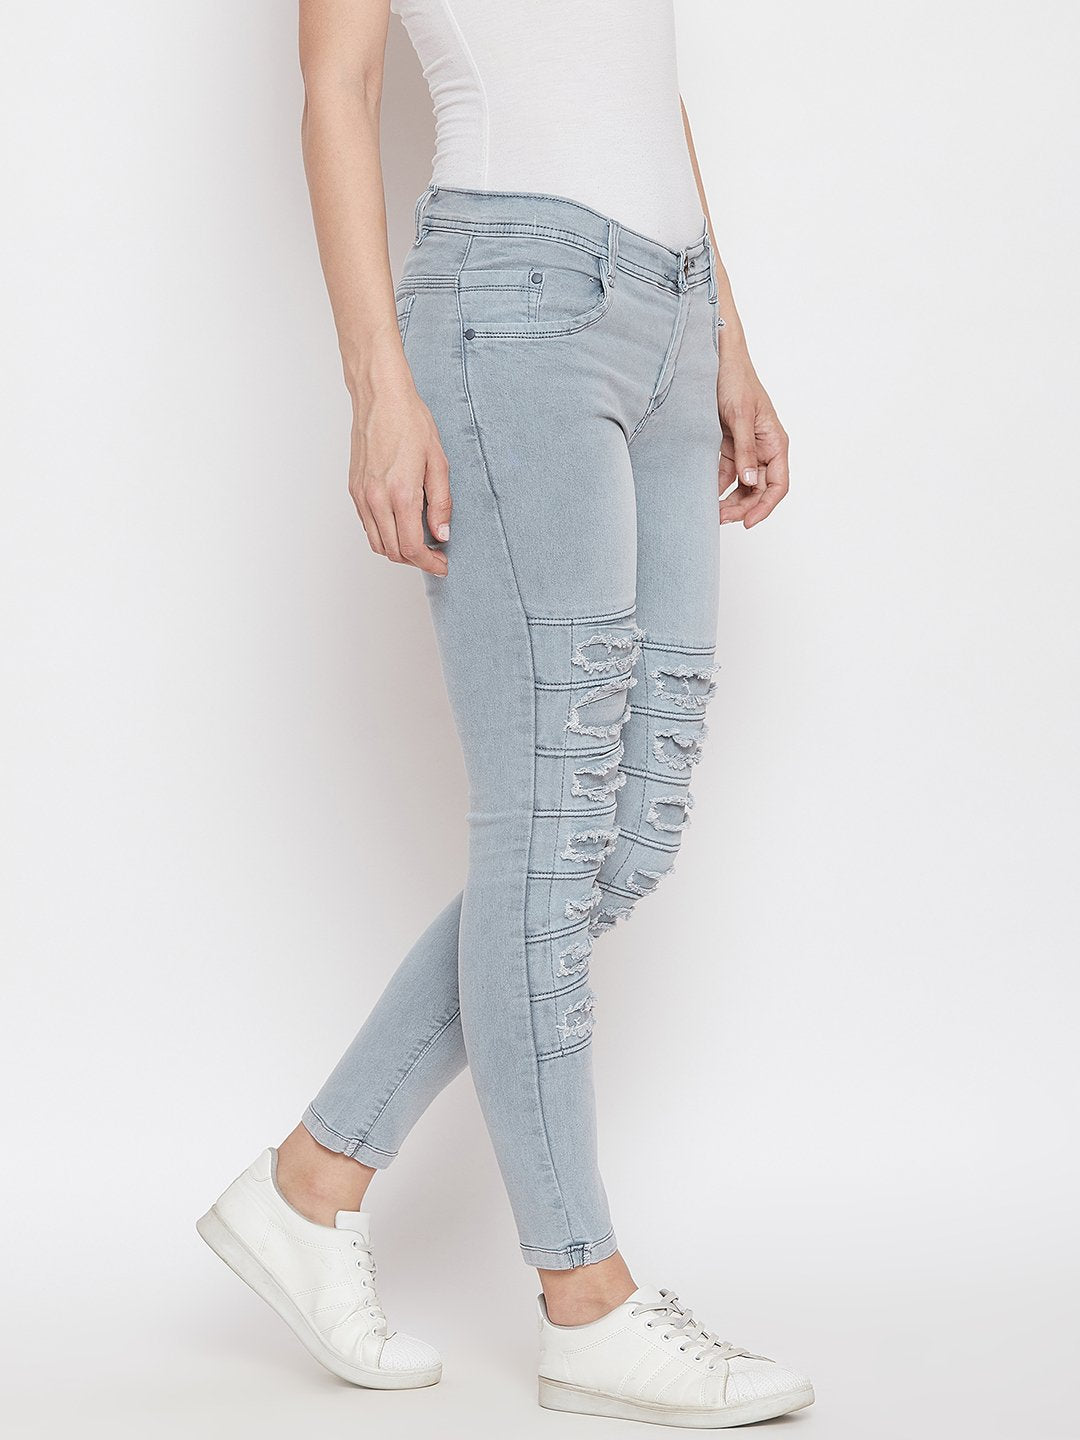 Distressed Stretchable Grey Jeans - NiftyJeans